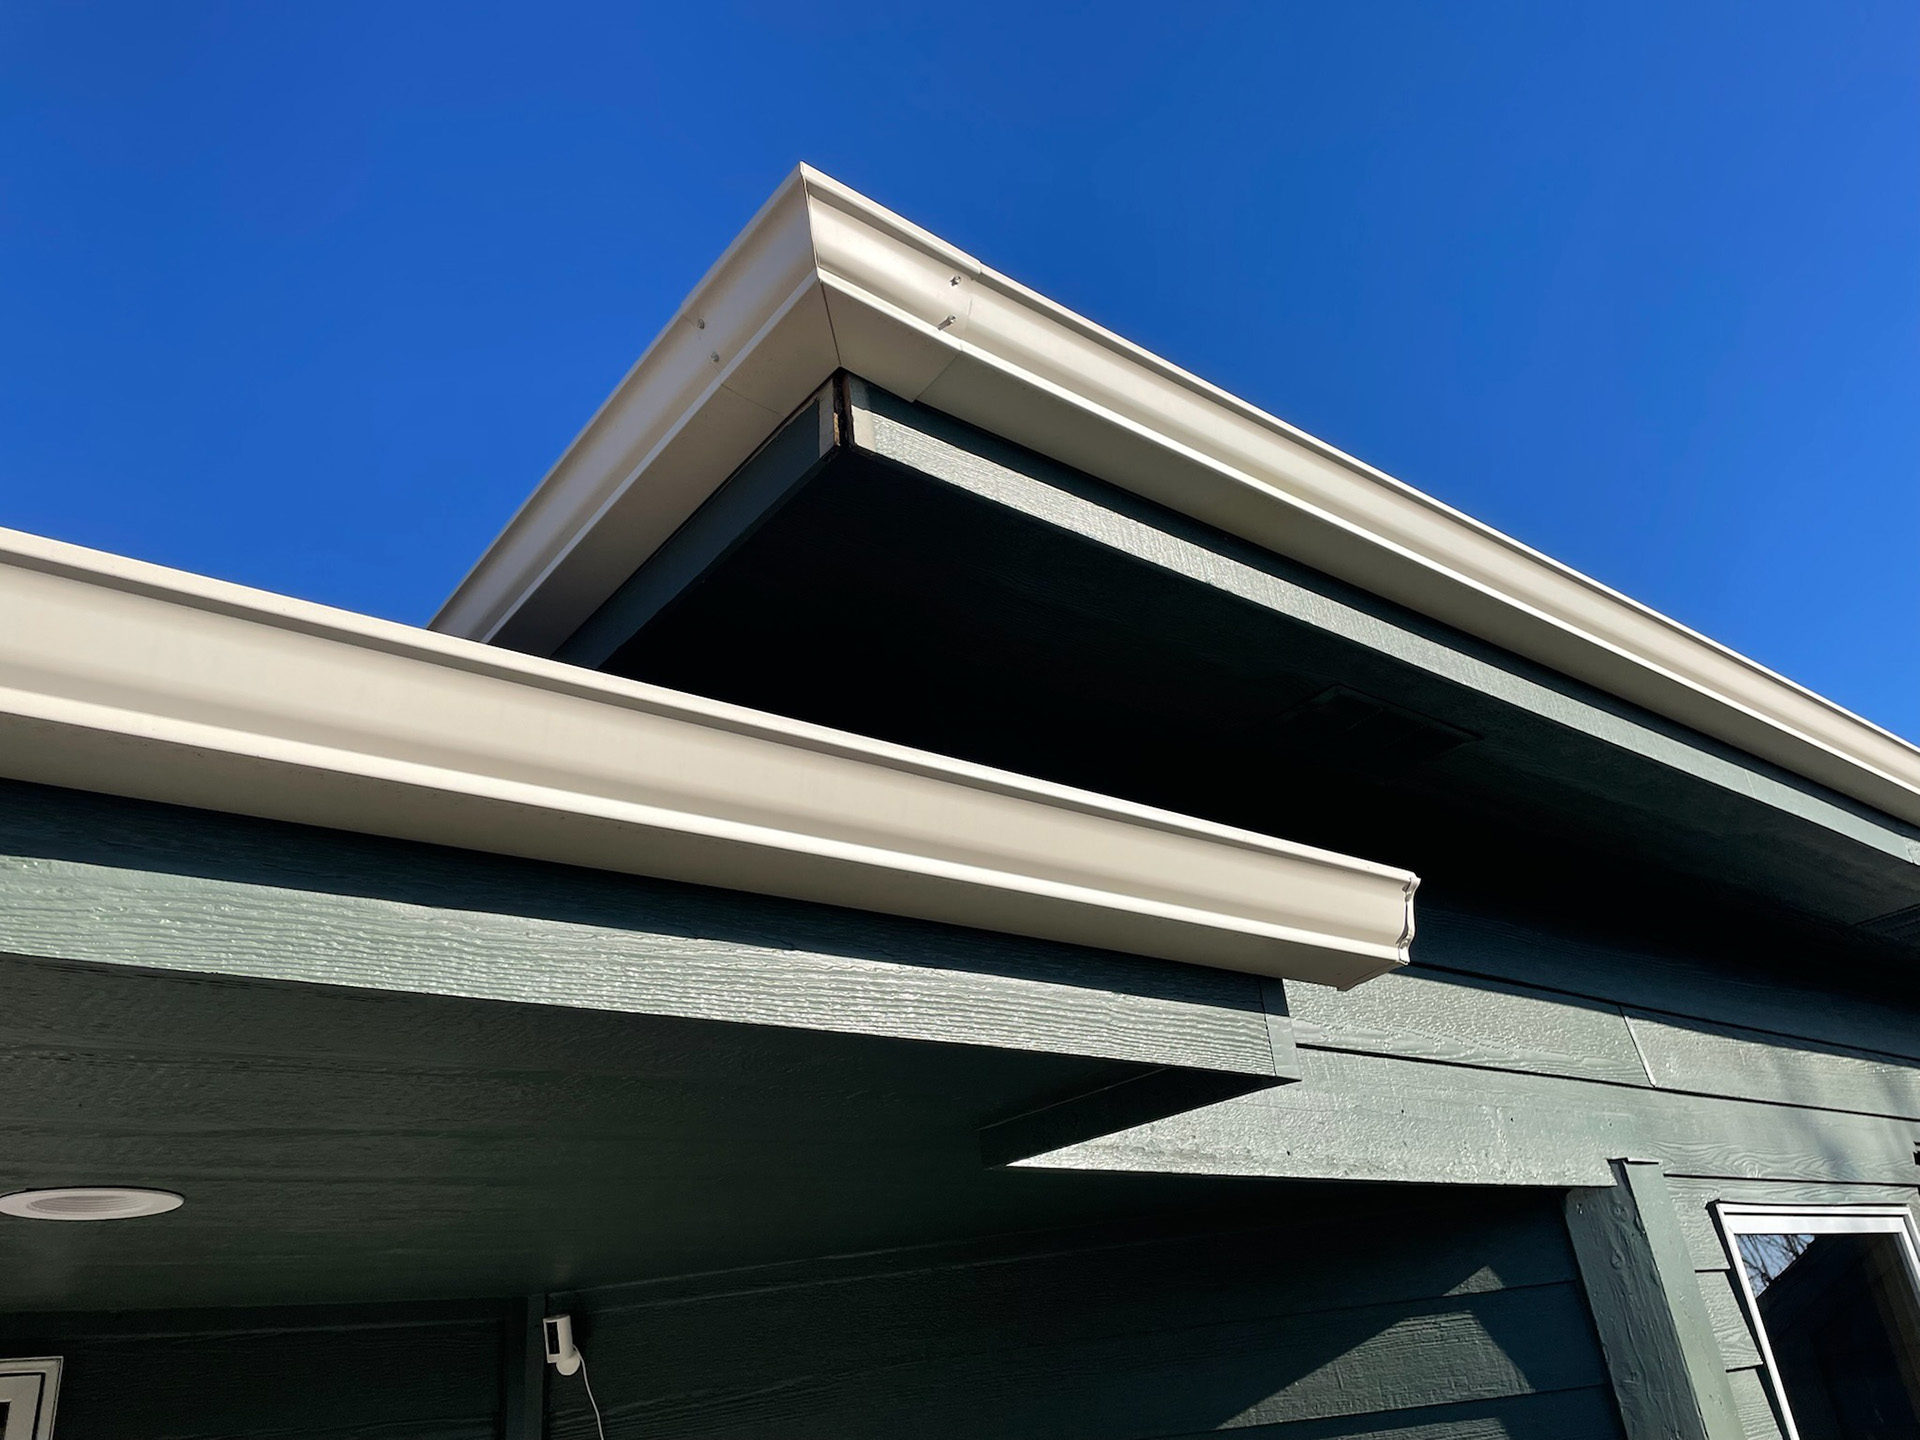 The image shows a close-up view of a building's roofline against a clear blue sky. The roof features beige soffit panels and matching fascia. There's a sharp geometric interplay between the different angles of the roof edges and overhangs. The structure appears modern with clean lines and a minimalist aesthetic. This photo seems to be taken from a low angle, looking up towards the sky, and highlights the crisp and professional finish of the roofing work likely completed by Pillar Exteriors.